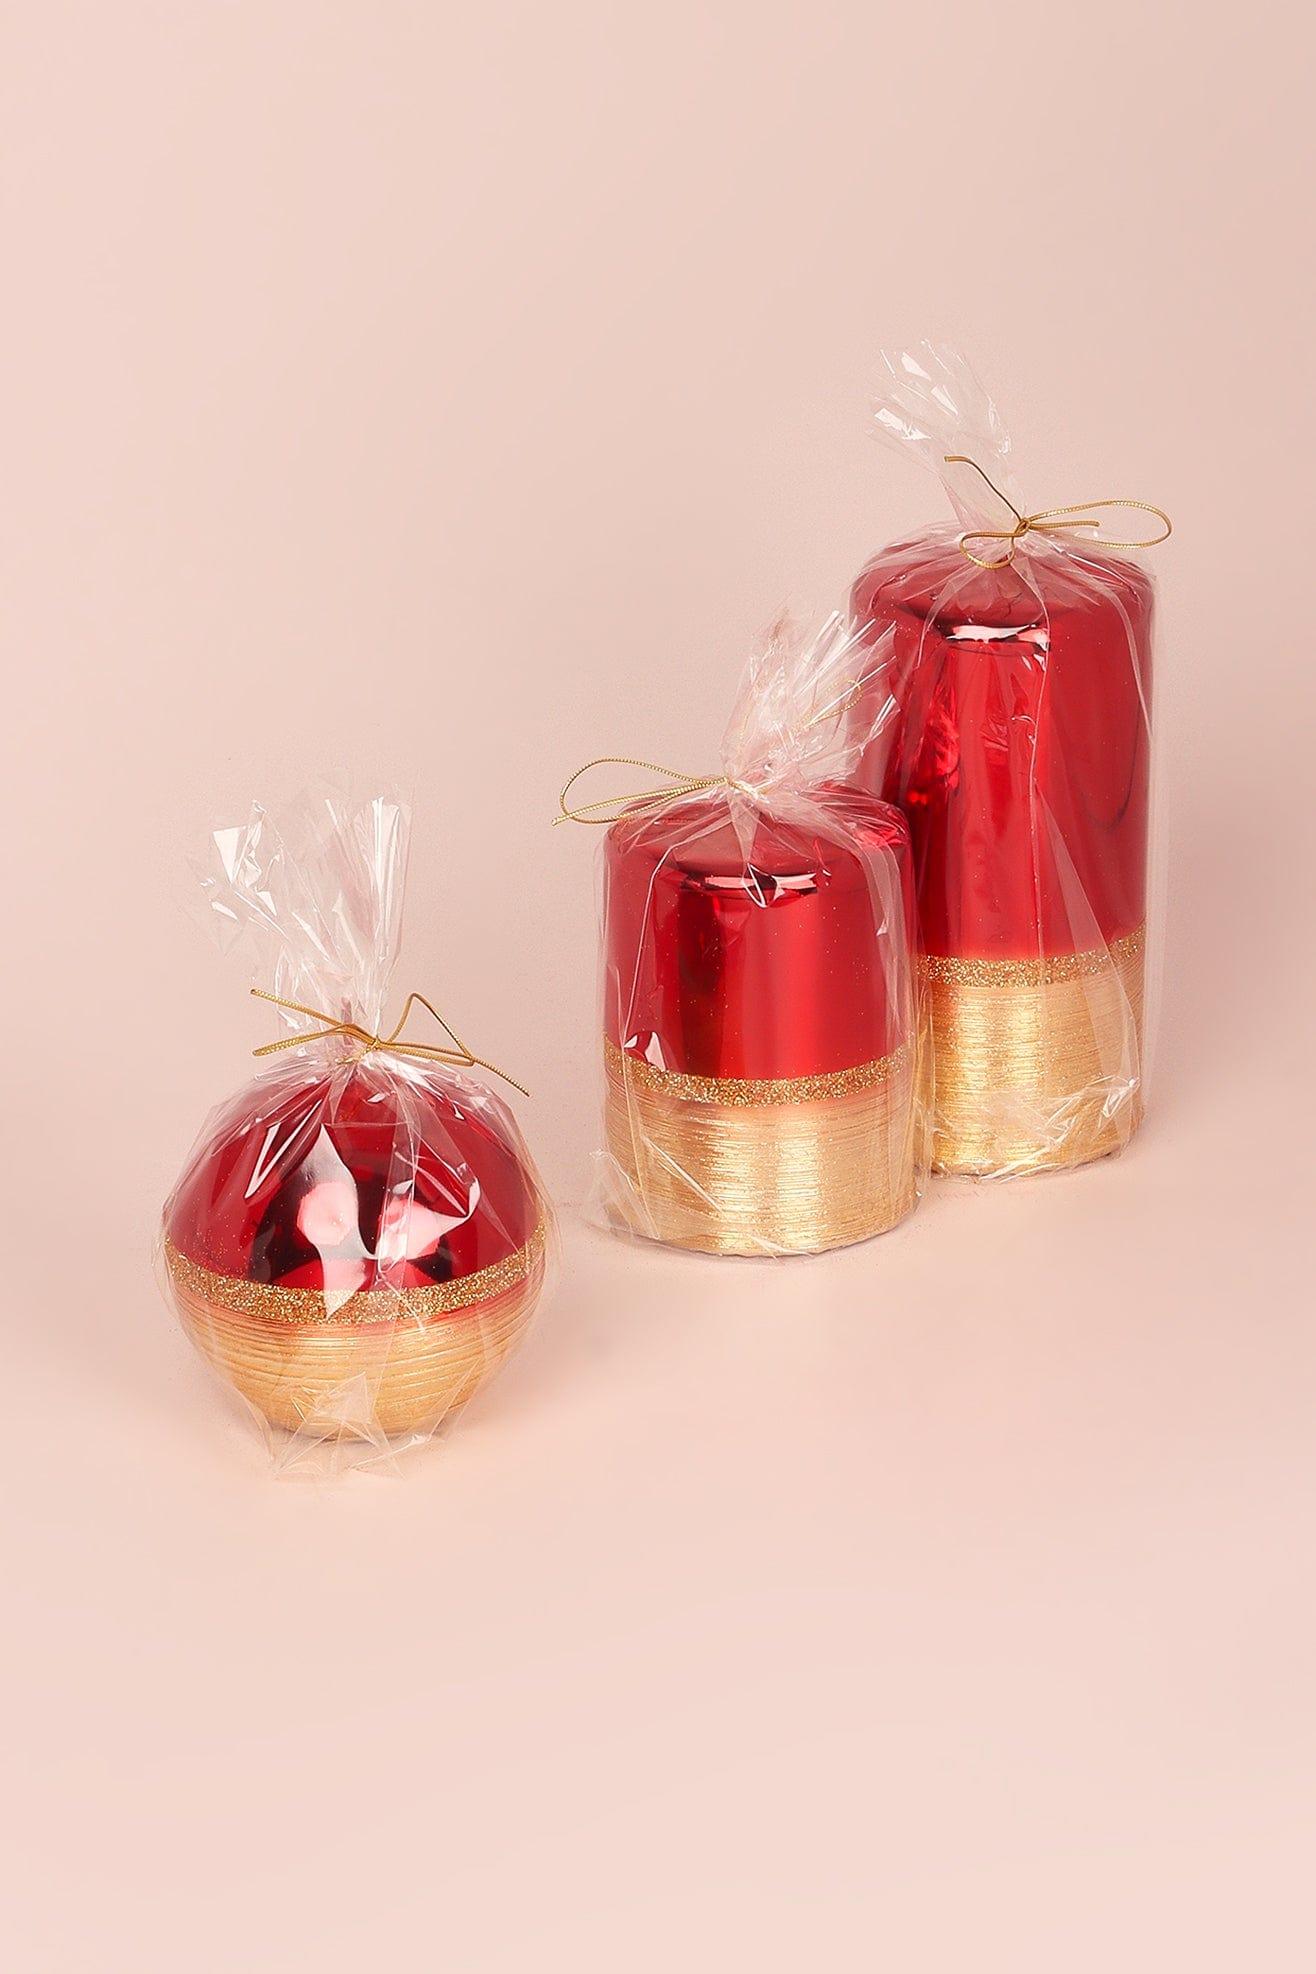 G Decor Candles Red and Gold Two Tone Glitter Glass Effect Reflecting Plain Gloss Pillar Candles